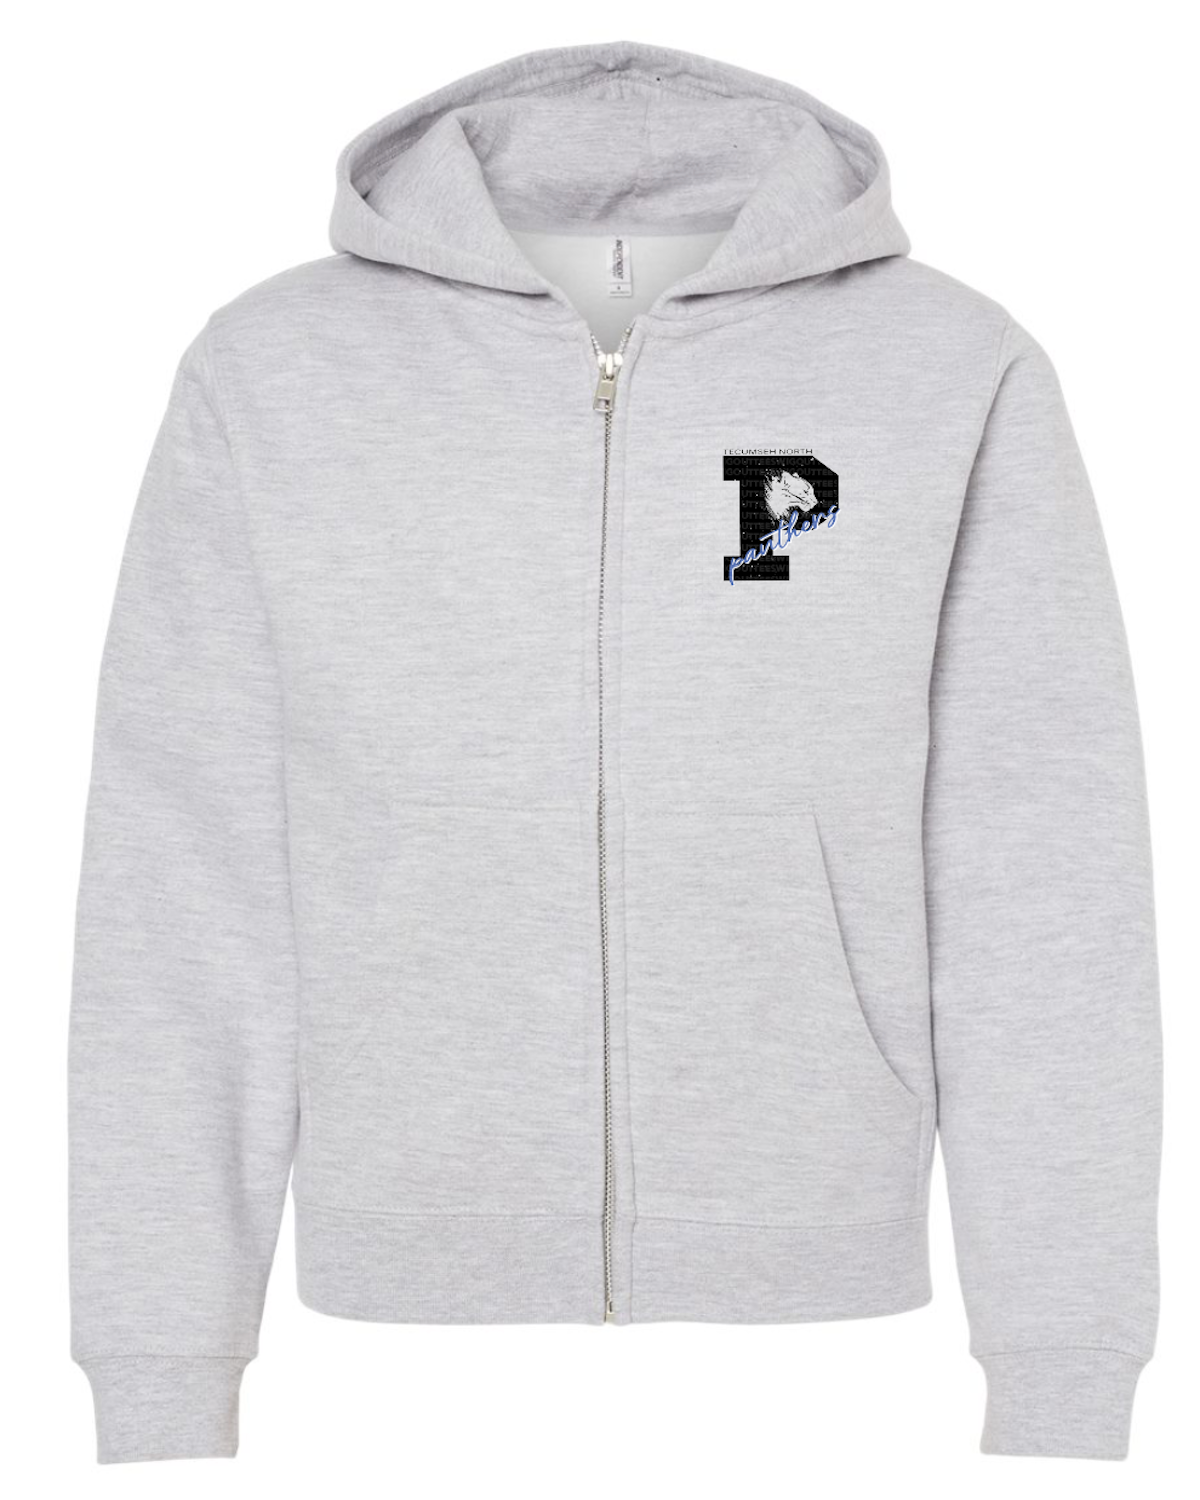 P is for Panthers Midweight Full-Zip Hoodie